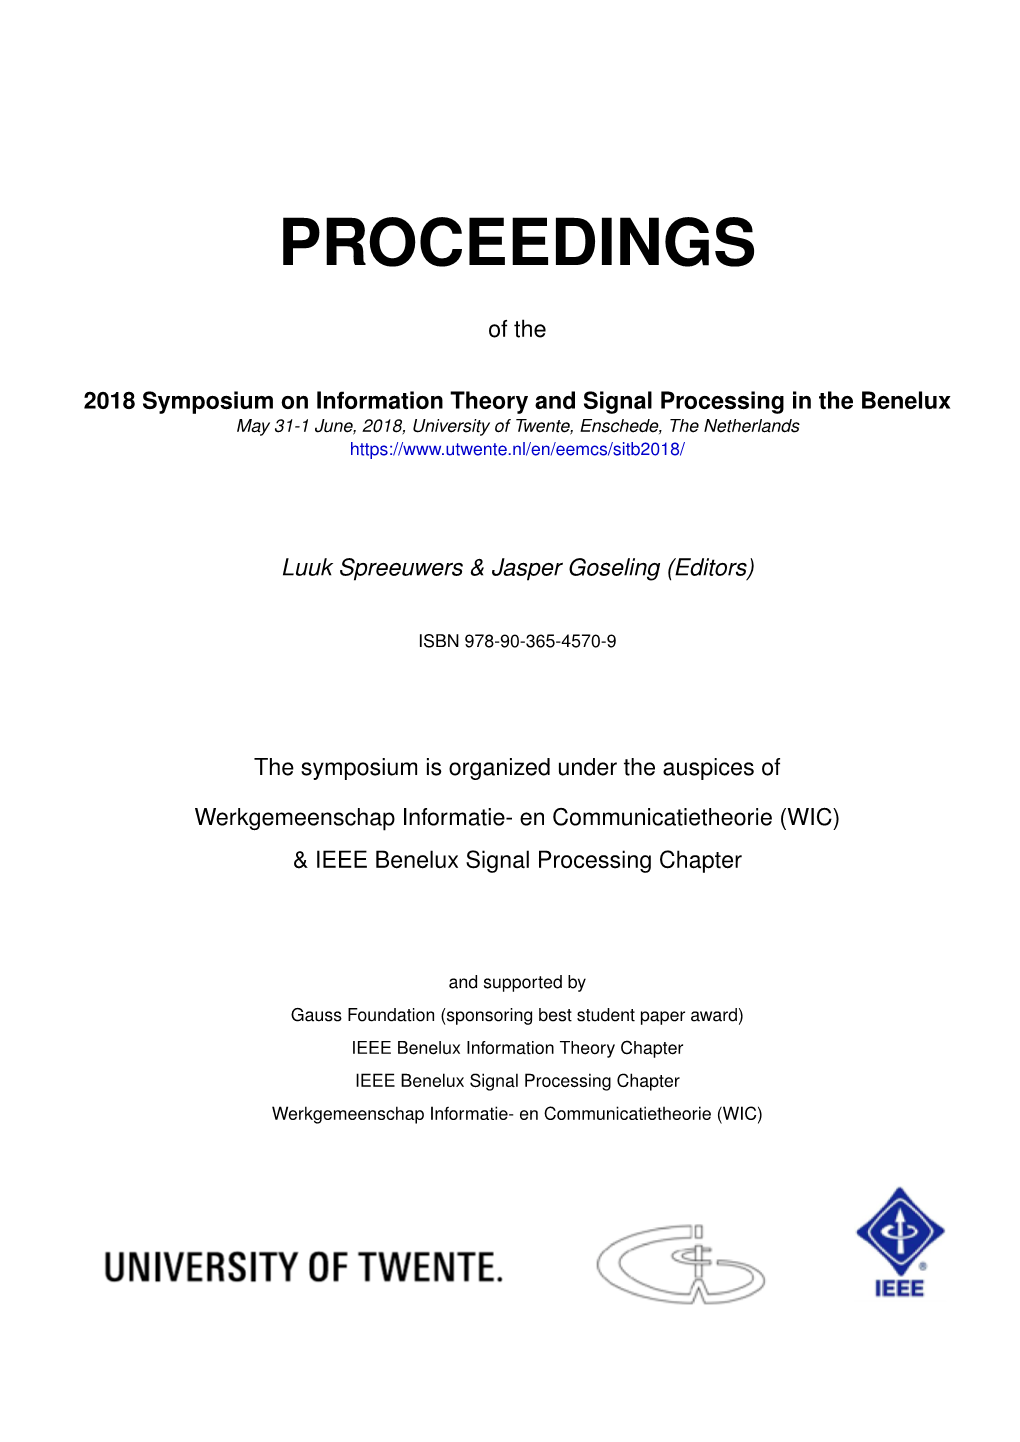 Proceedings of the 2018 Symposium on Information Theory and Signal Processing in the Benelux, May 31